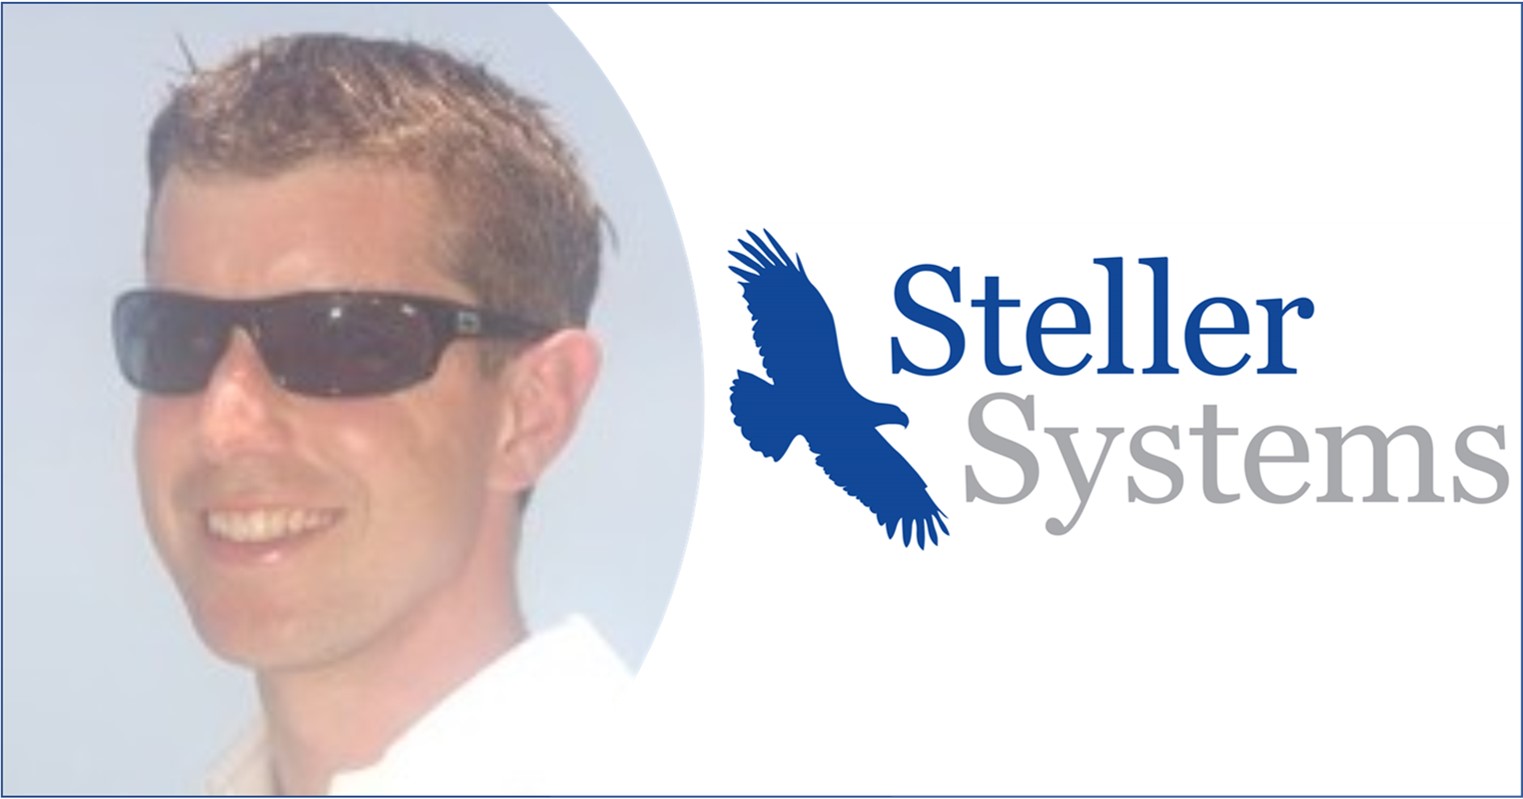 Christian Steller i want-. Welcome system